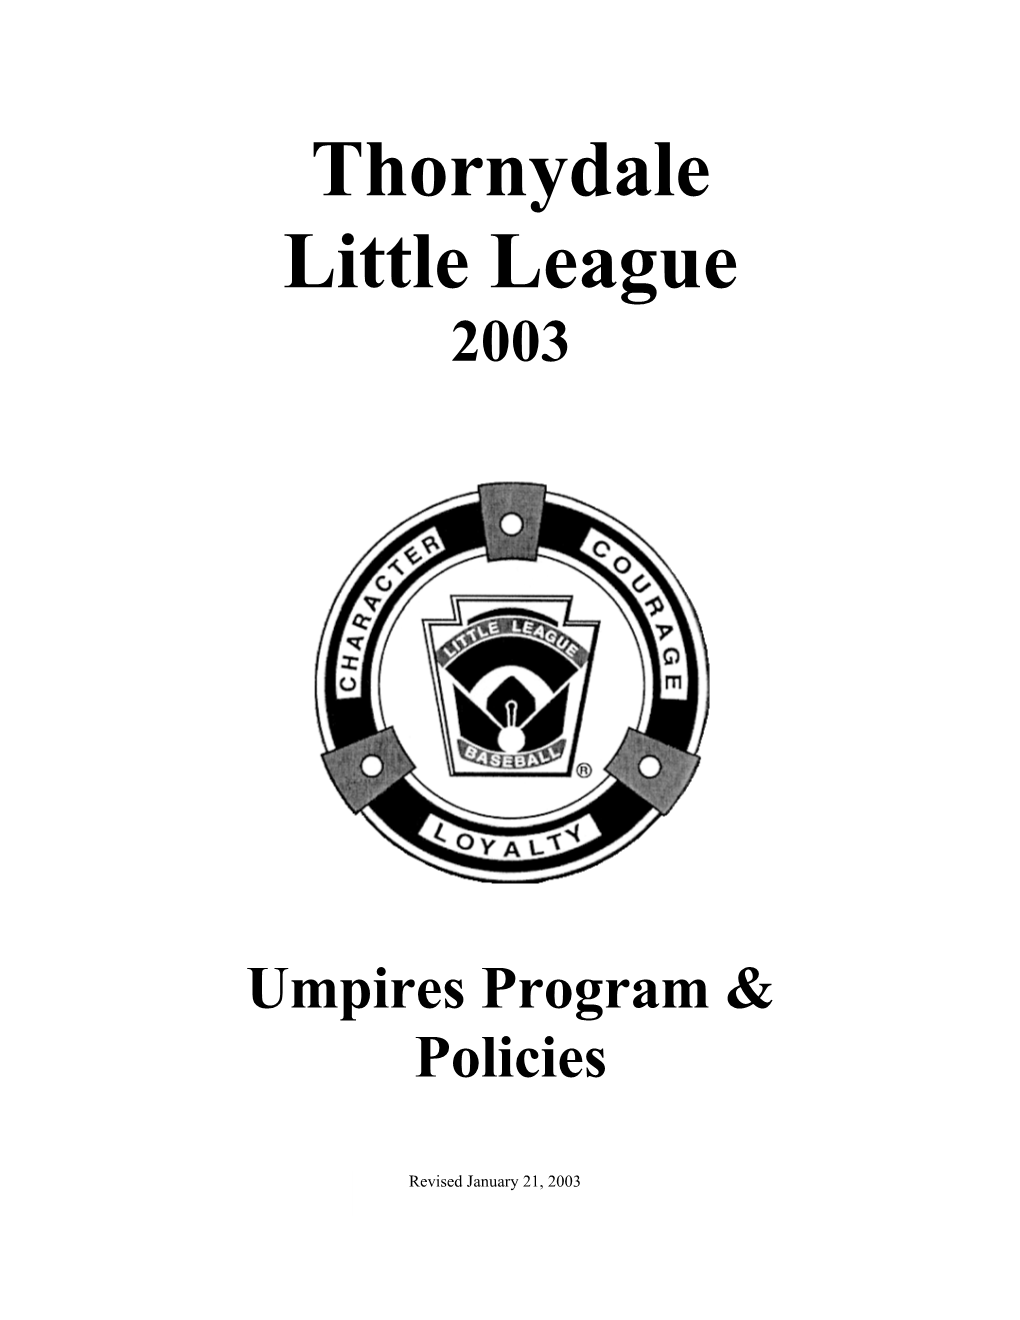 Thornydale Little League Umpire Mission and Policies